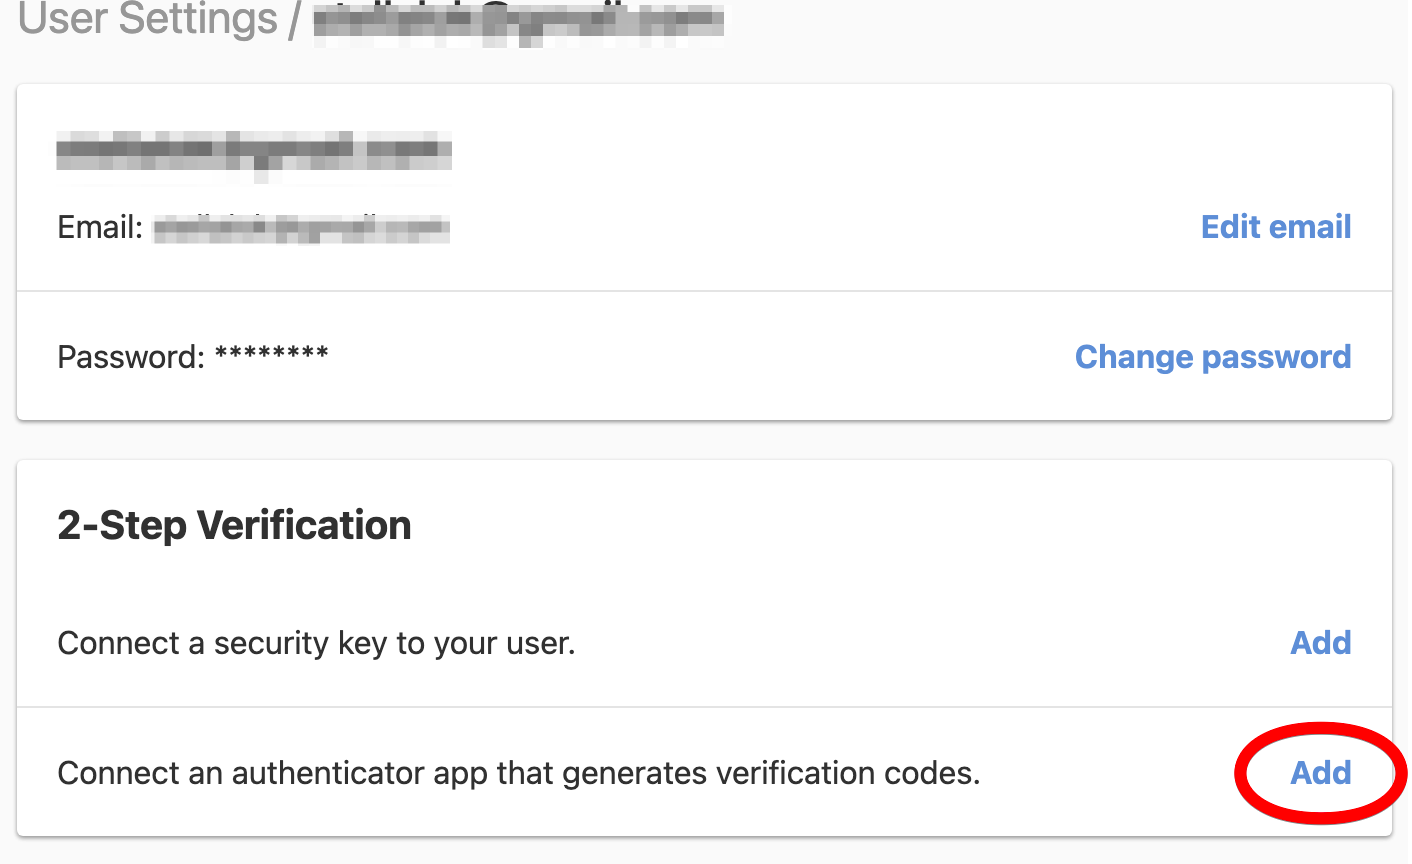 Enable multi-factor authentication with one-time password